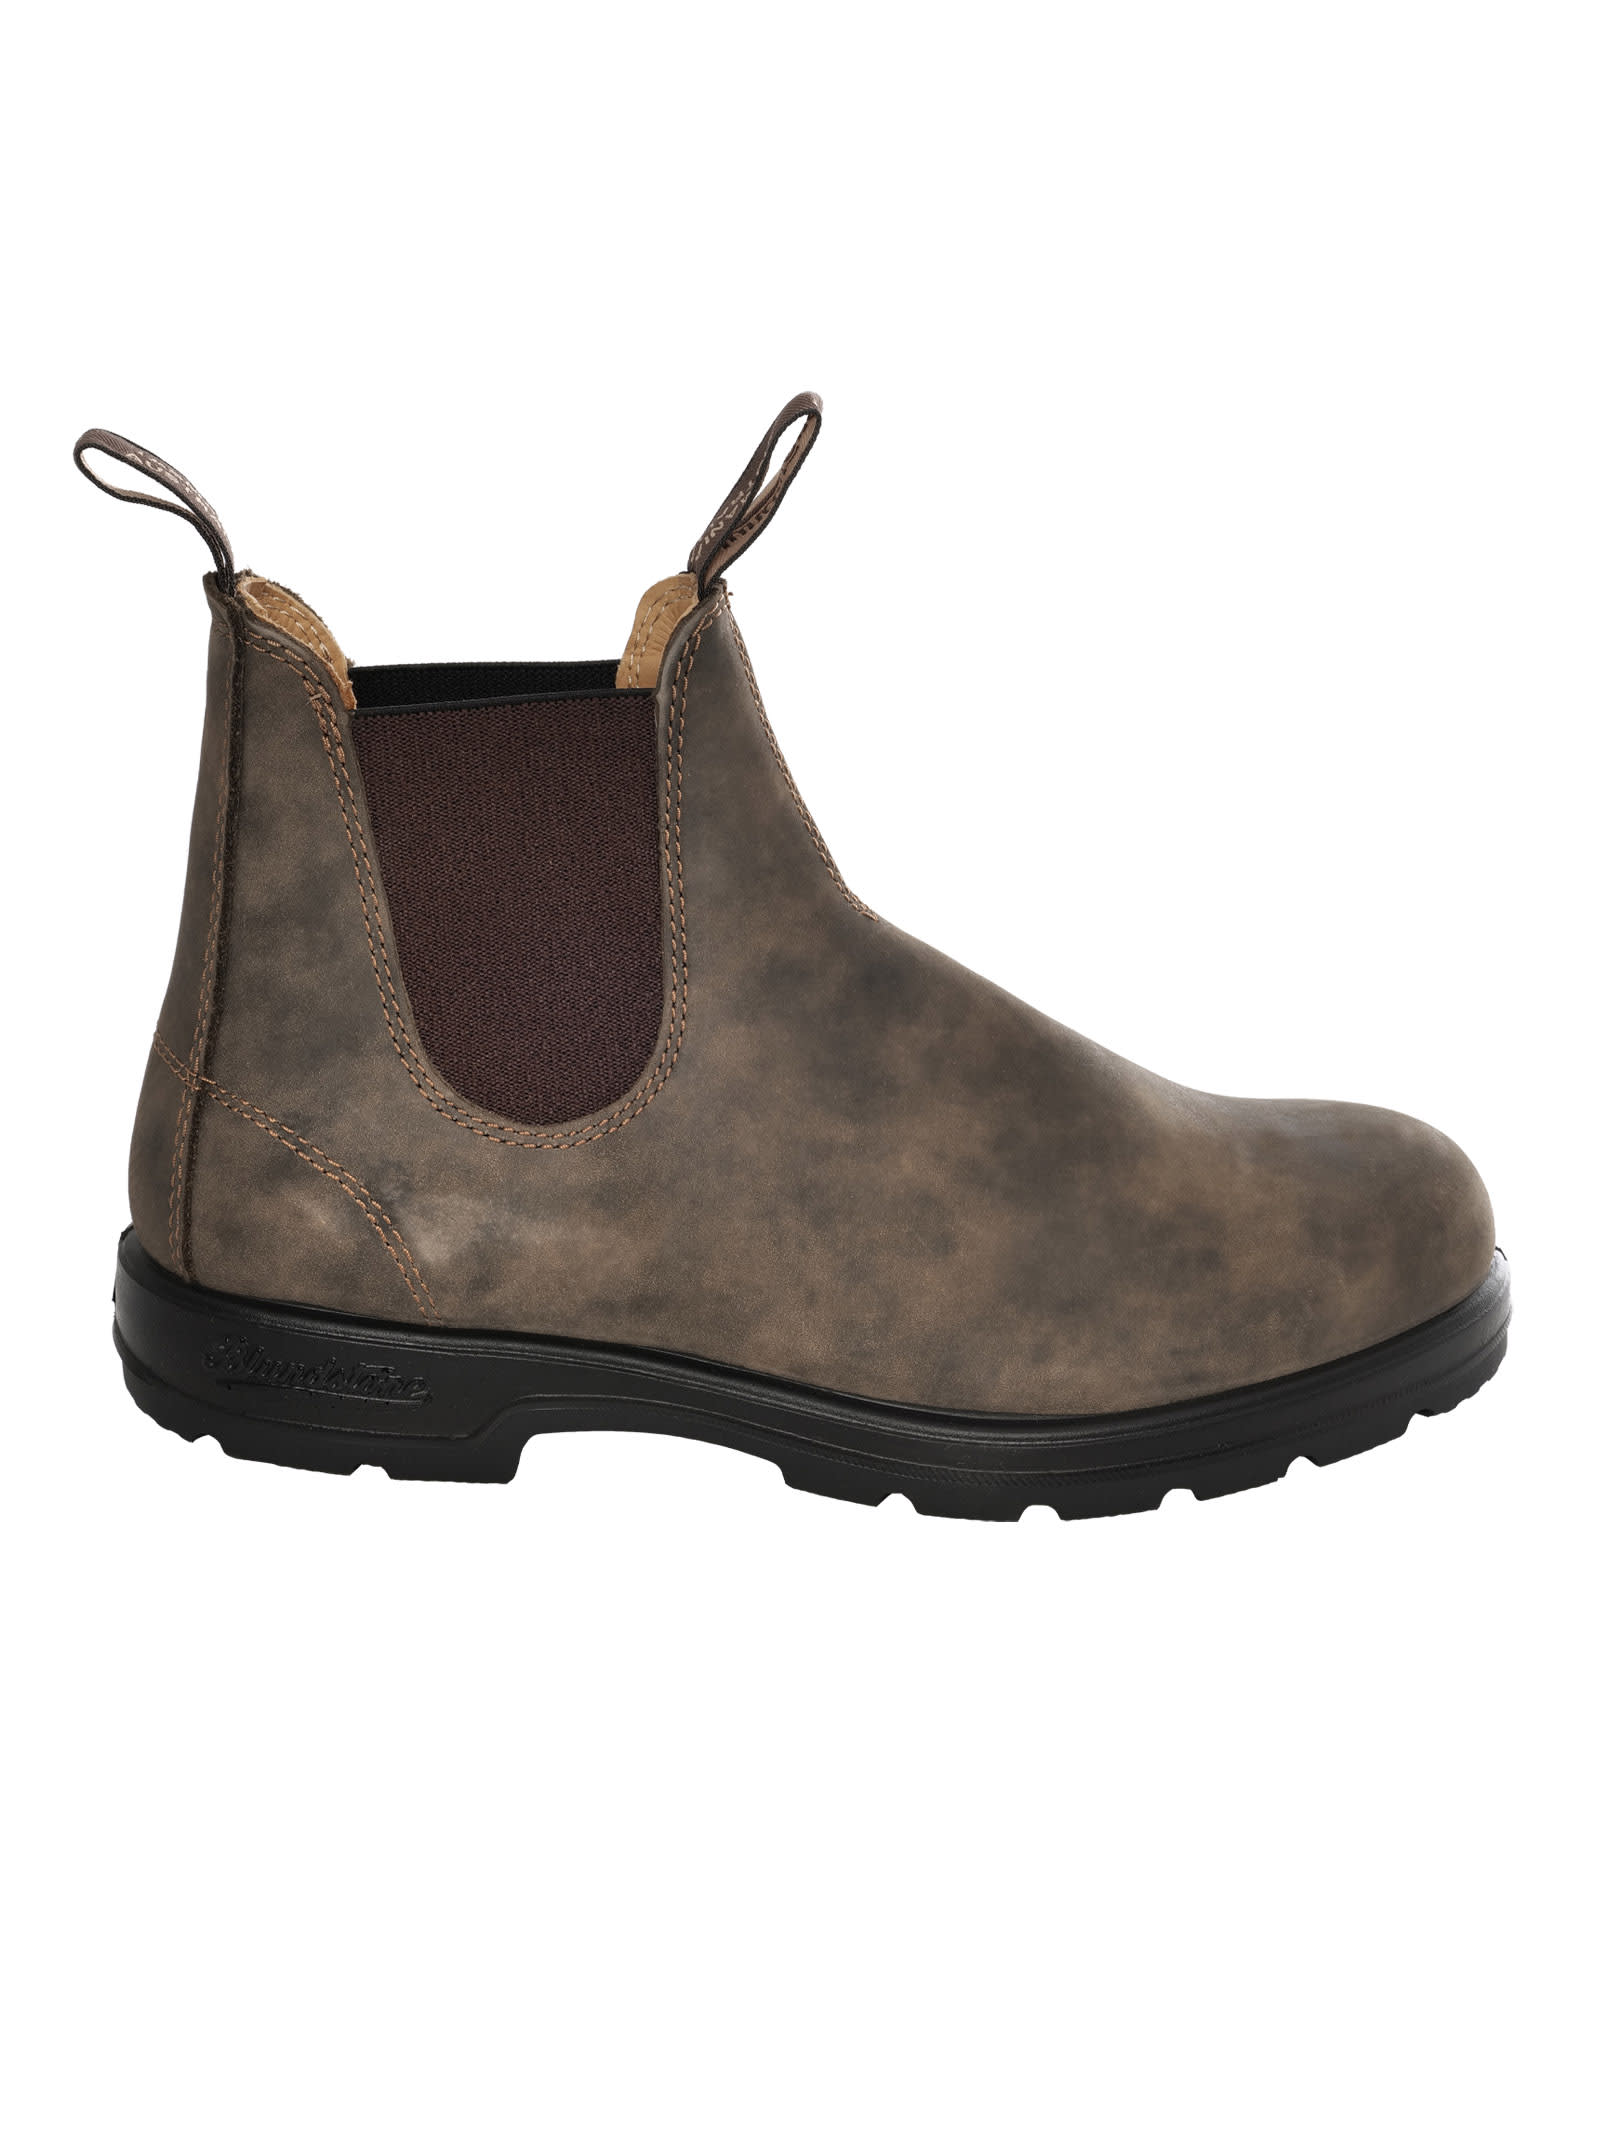 Blundstone Classic Boots